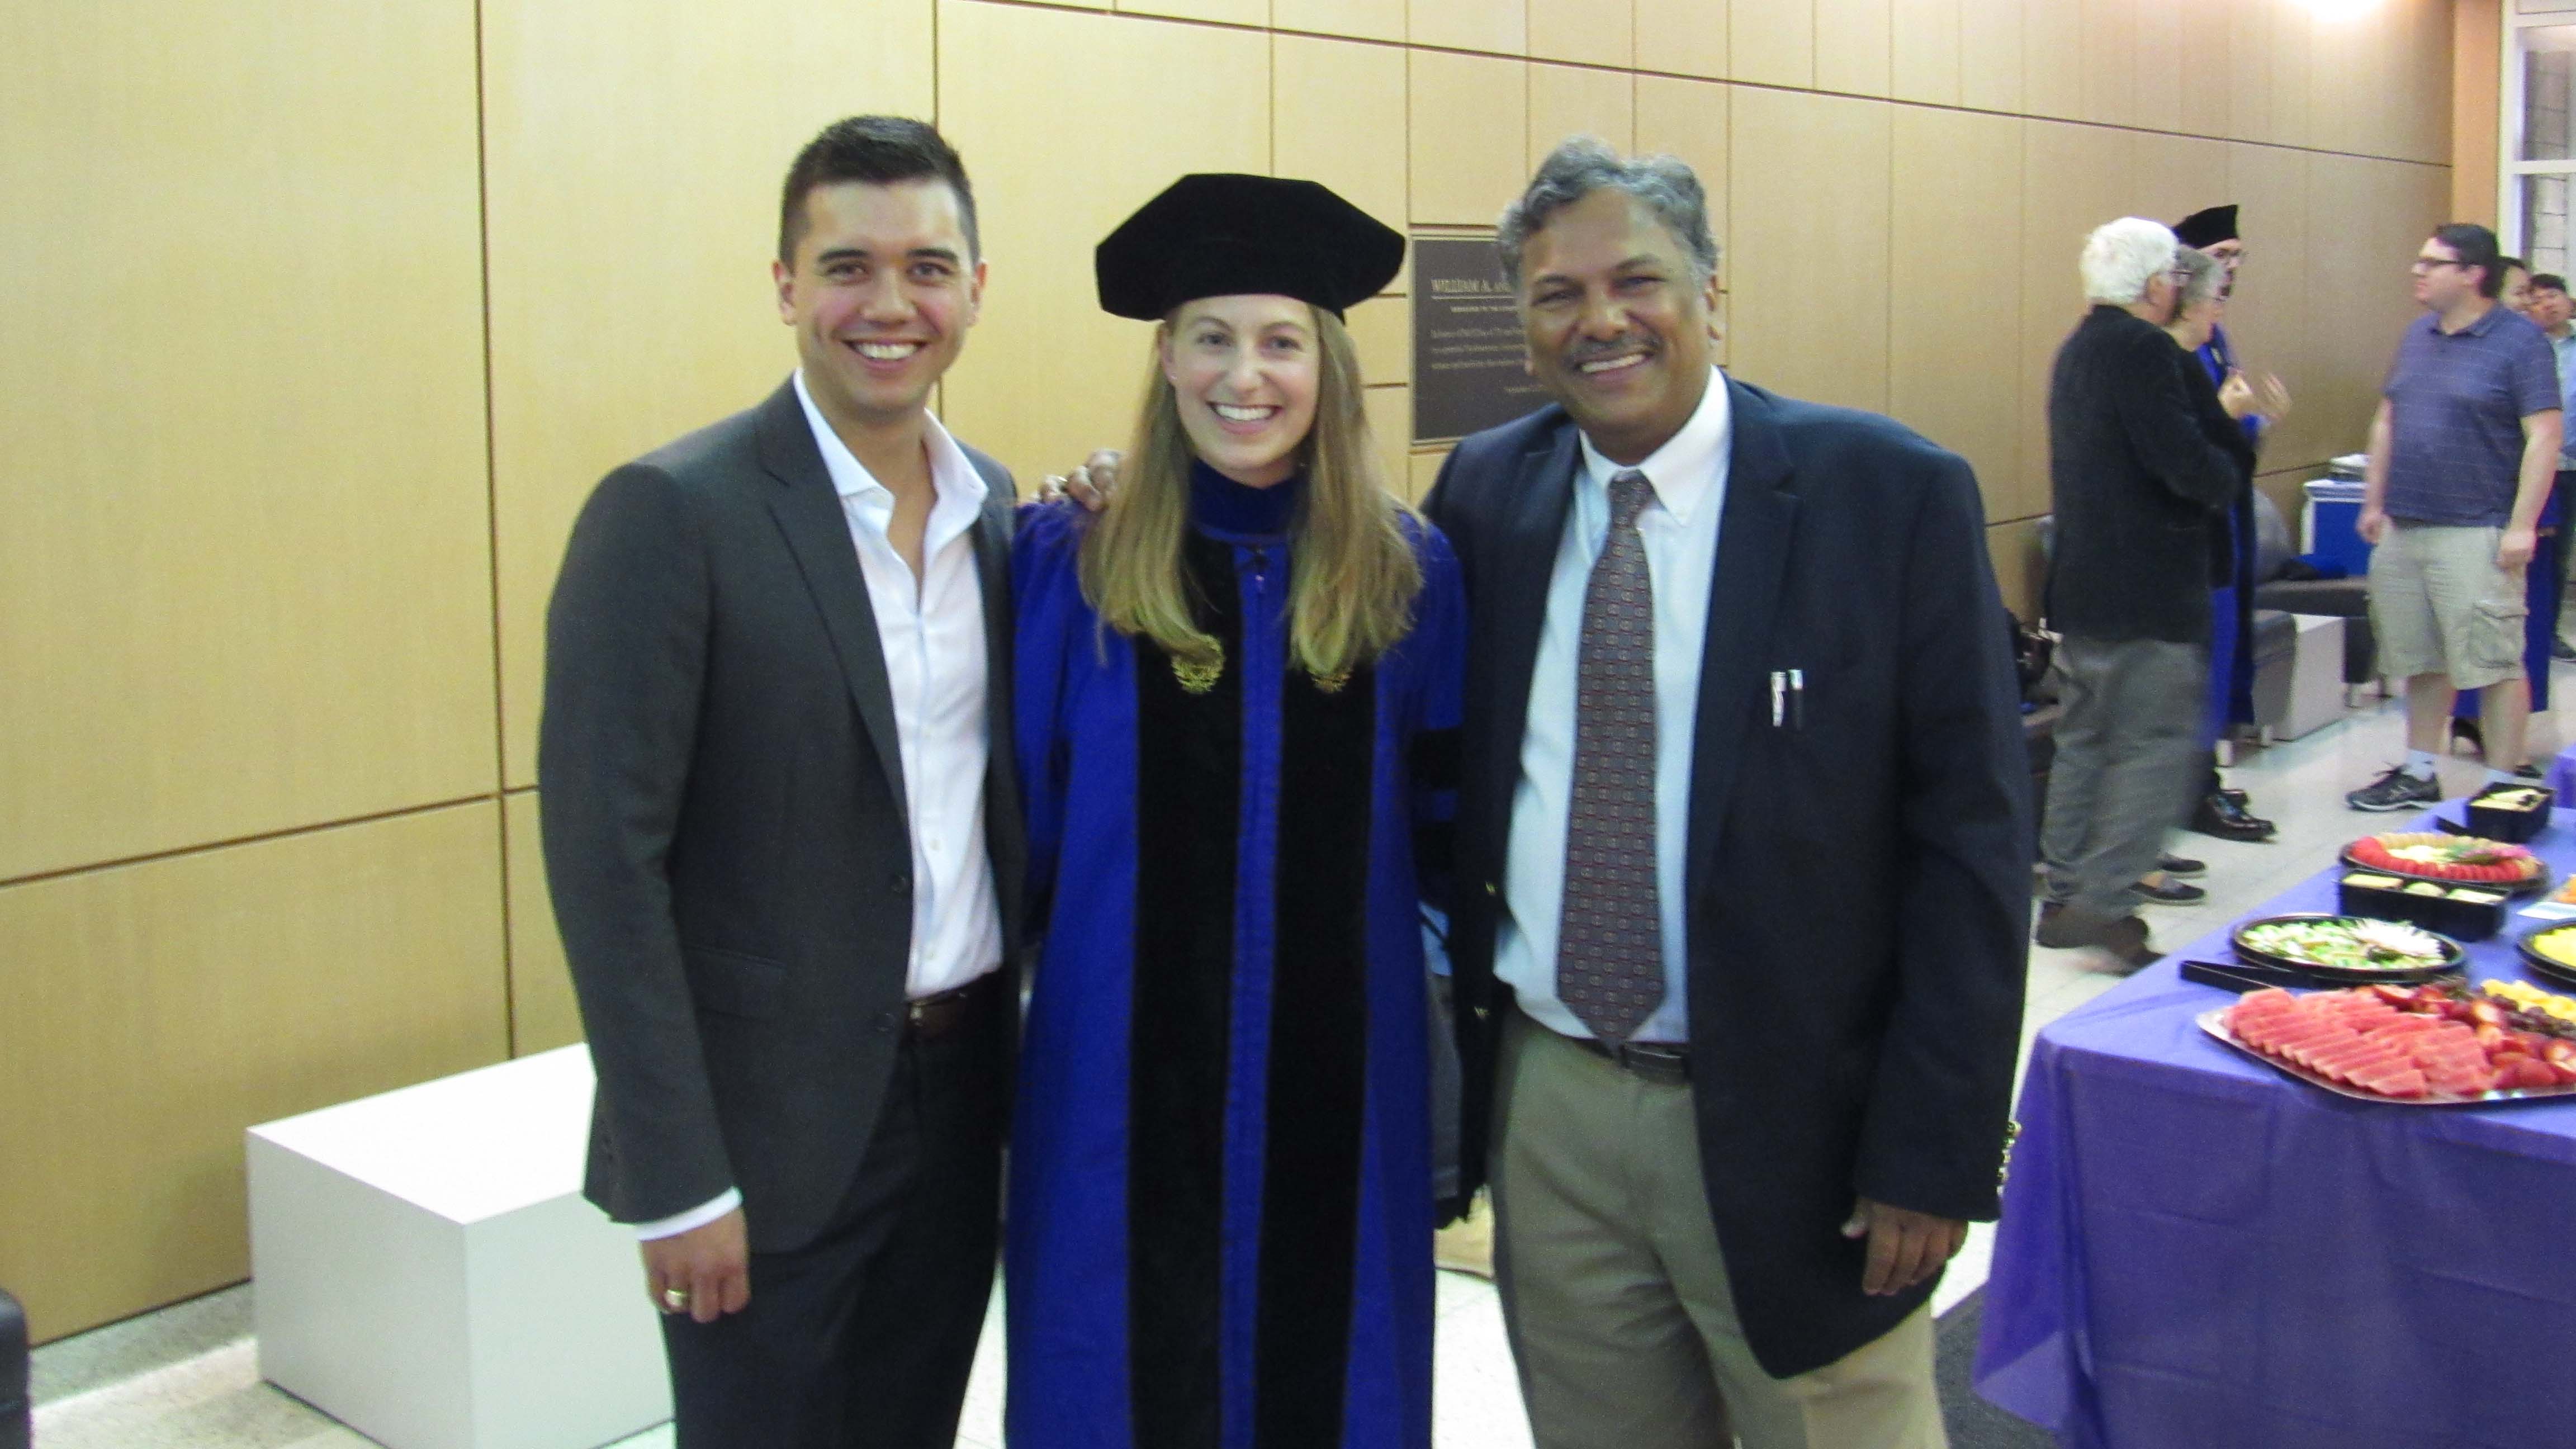 Eve Hanson, center, with boyfriend Dean and professor Dravid at a commencement celebration in Cook Hall.